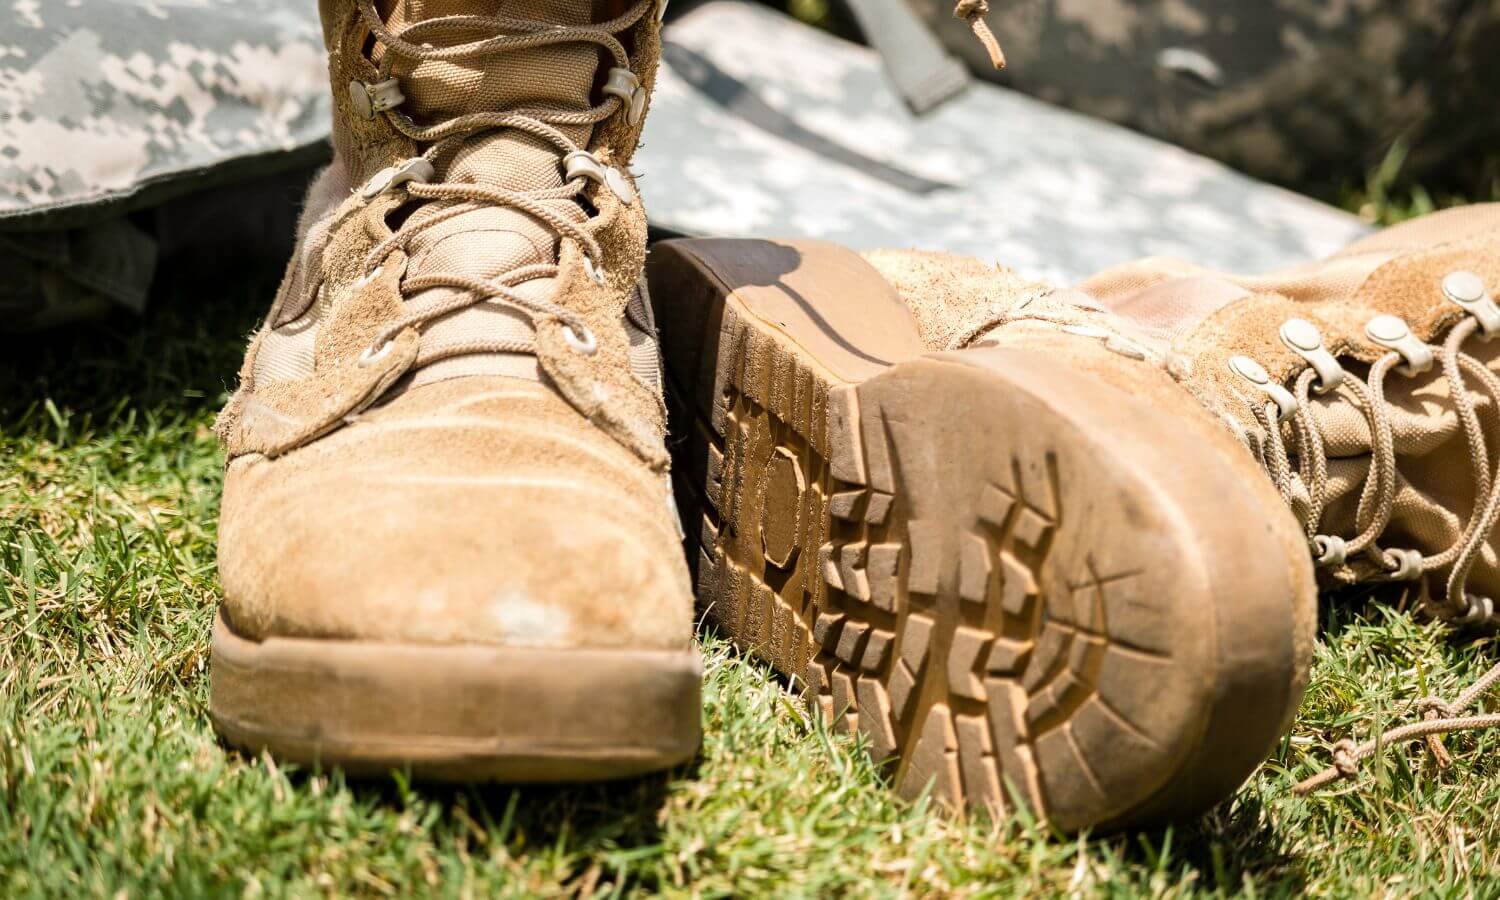 Boots of a soldier experiencing challenges of military life and deployment stress